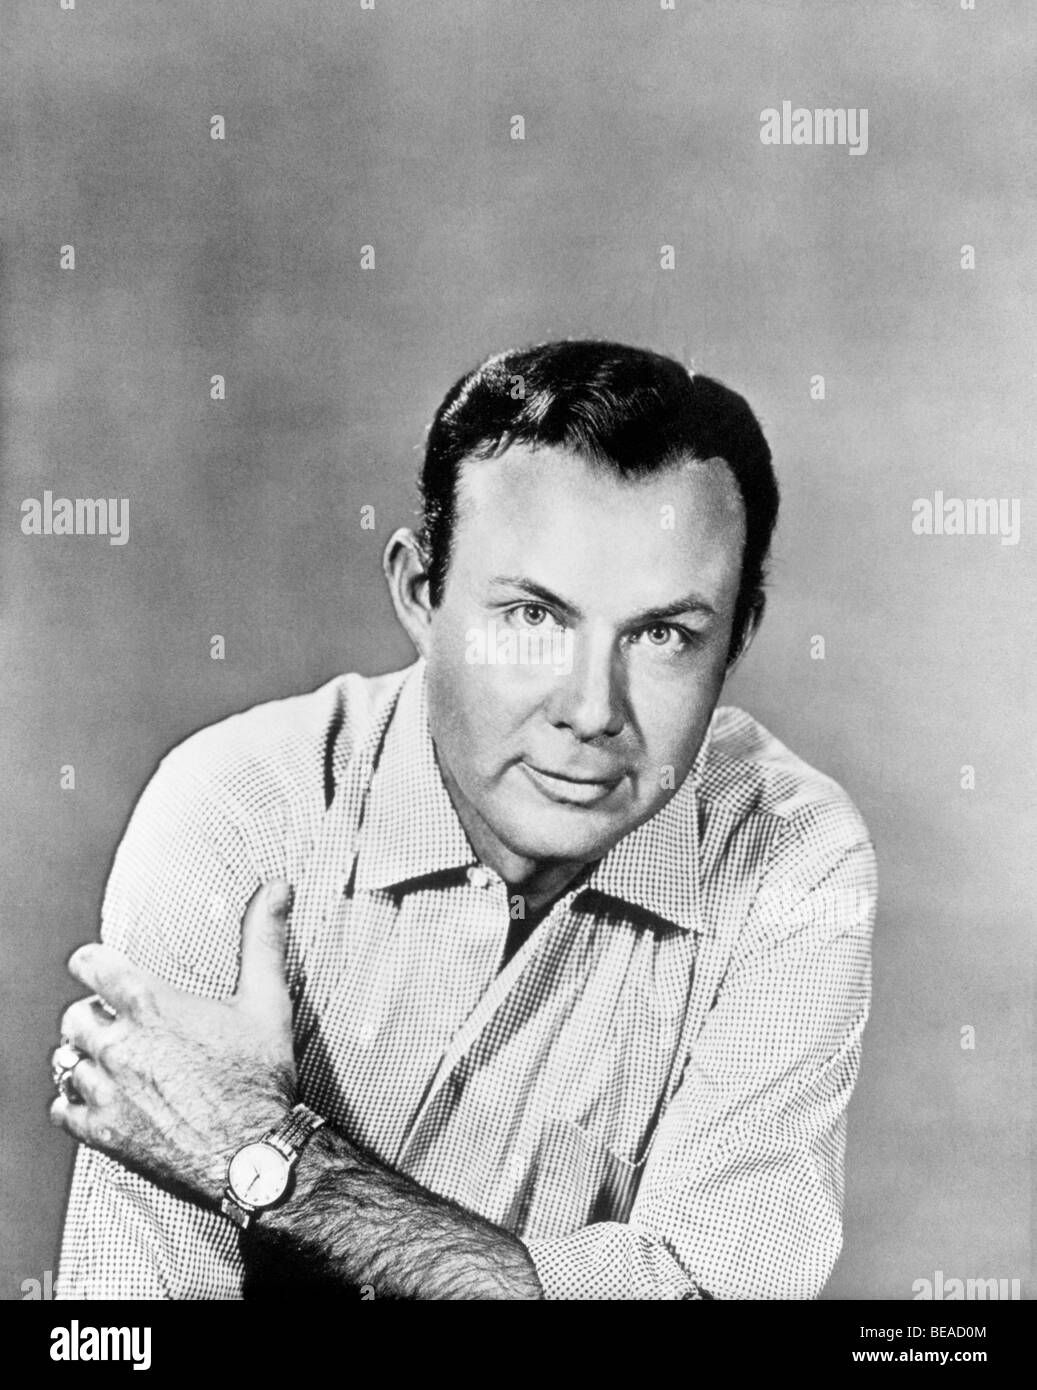 JIM REEVES  - US Country and Western musician Stock Photo